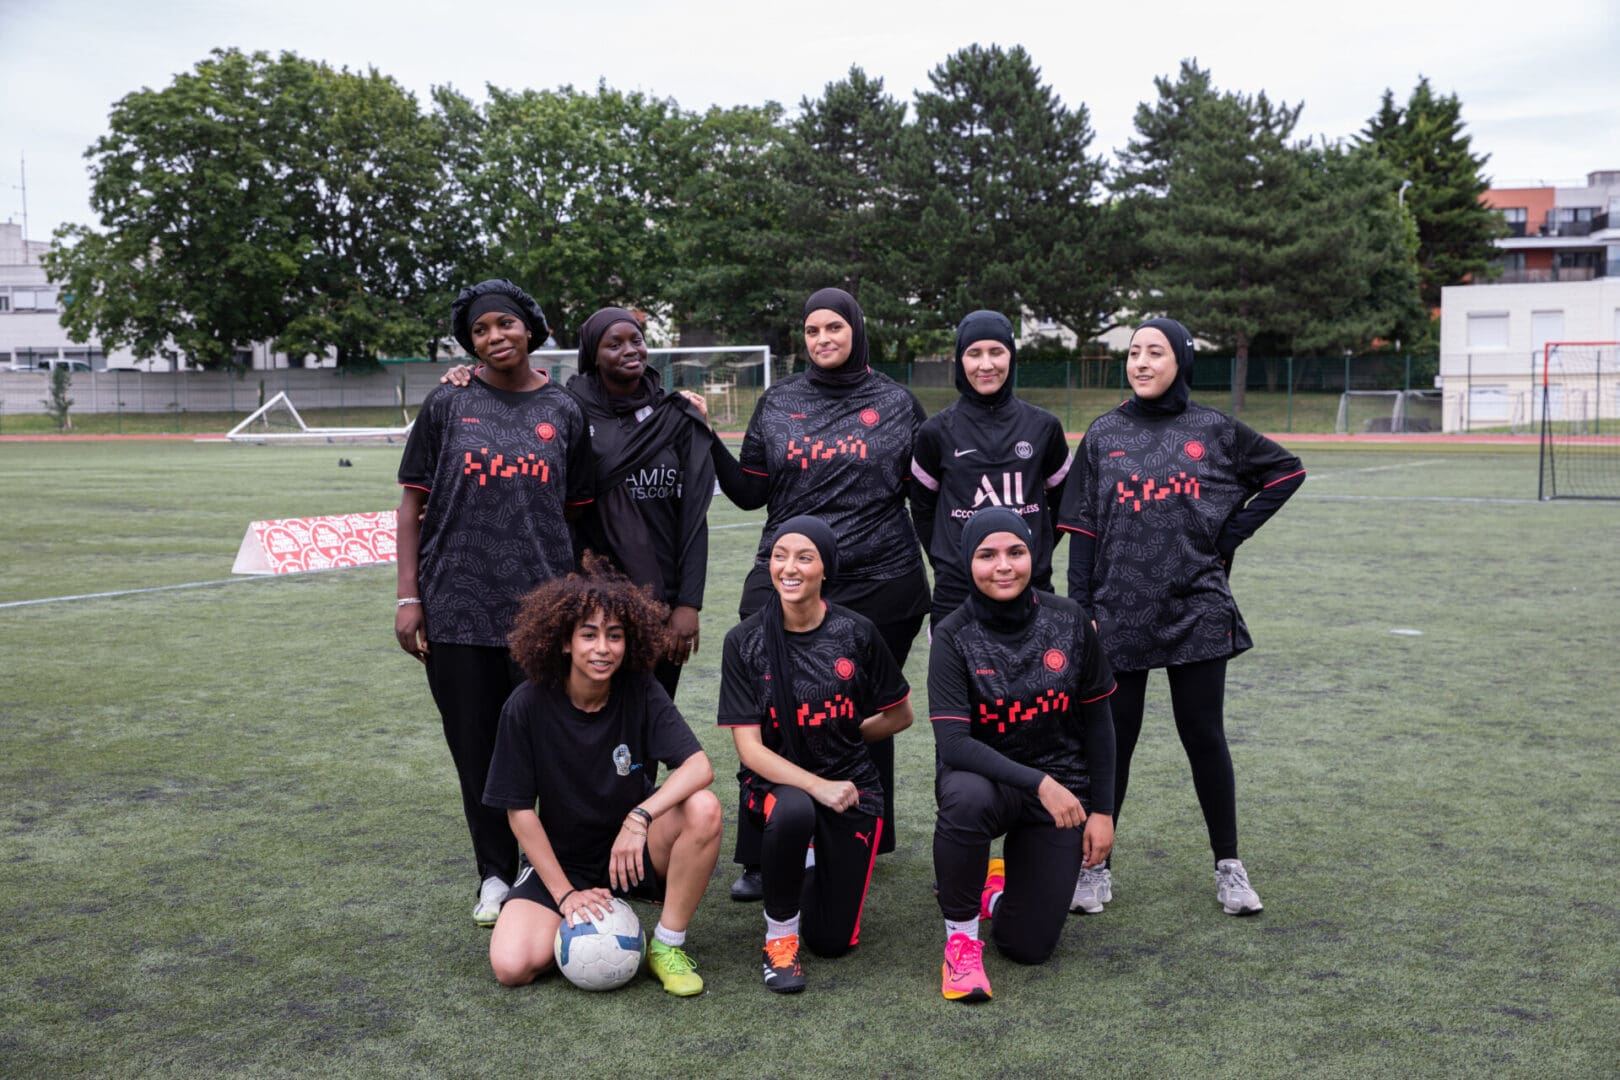 Group portraits of participants at an event organised by Les Hijabeuses, a collective of football players campaigning to overturn hijab bans in French football. 29 June 2024